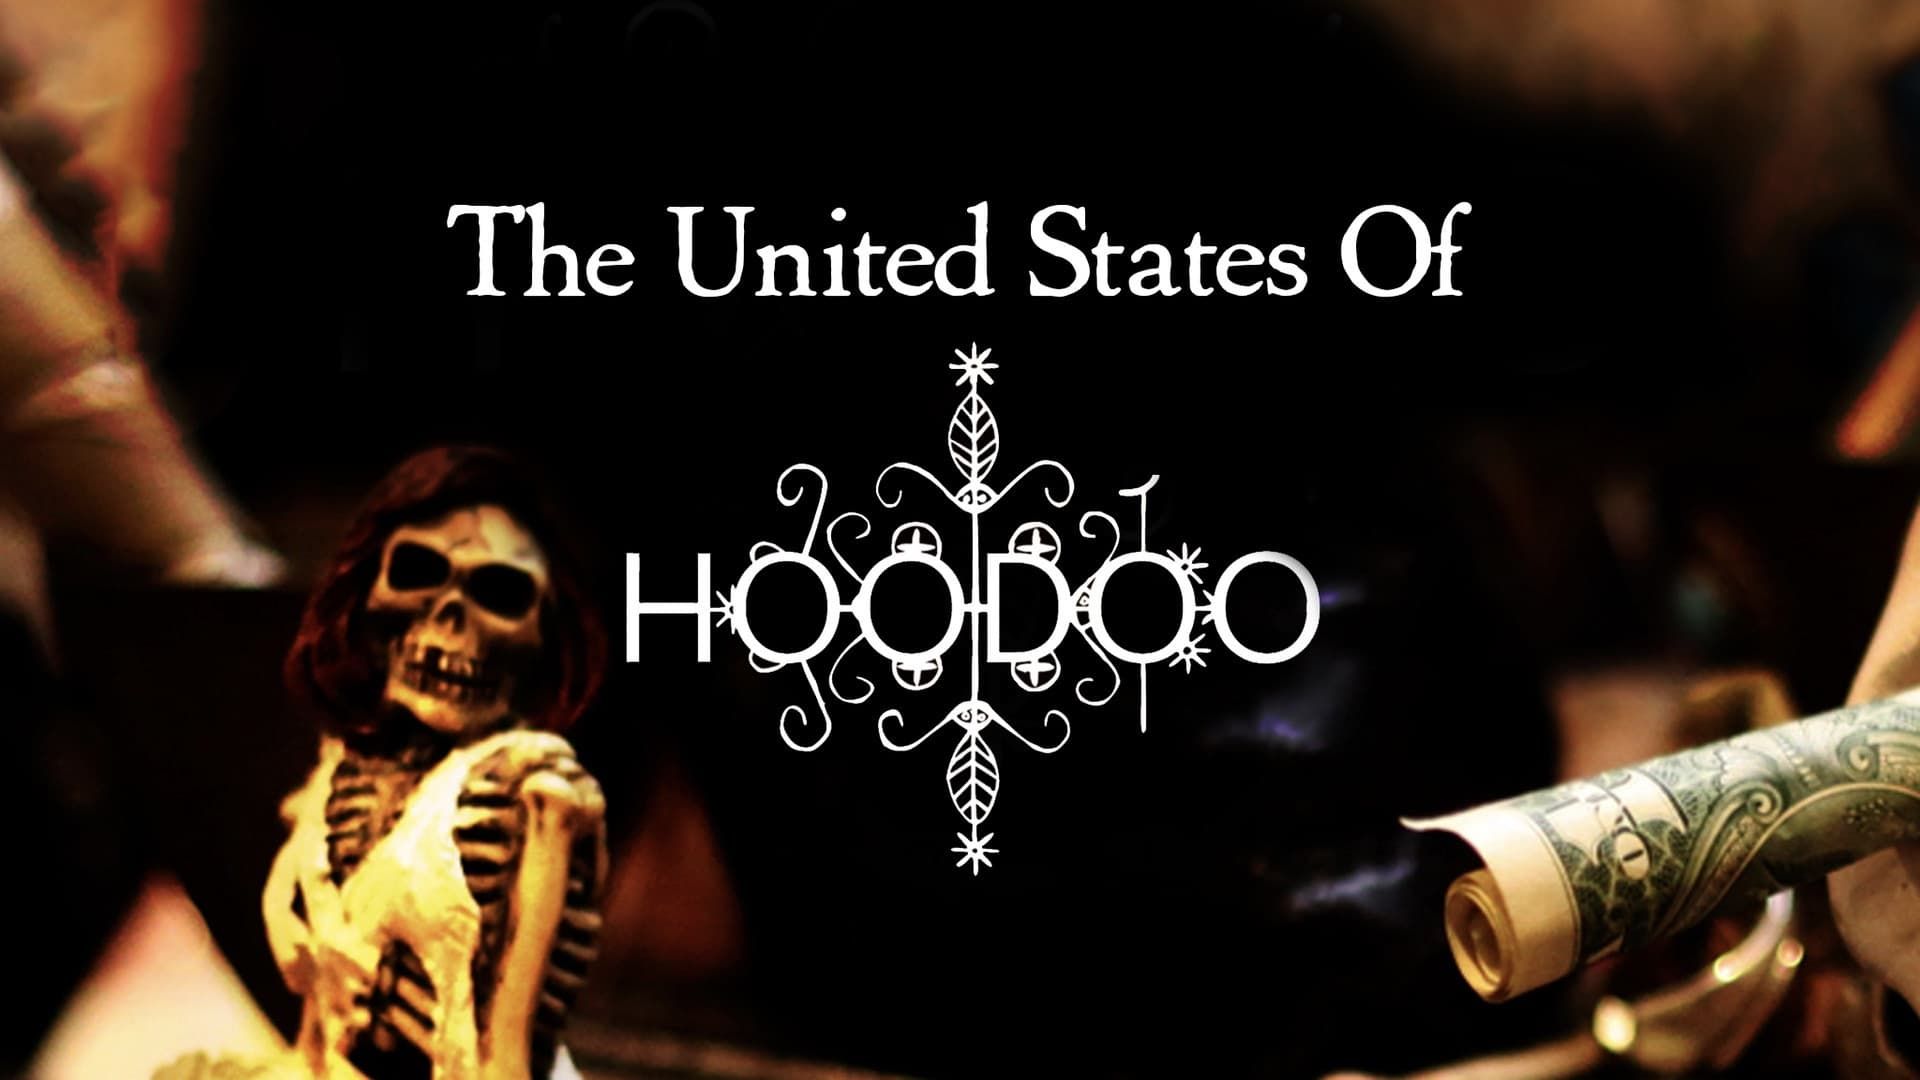 The United States of Hoodoo background